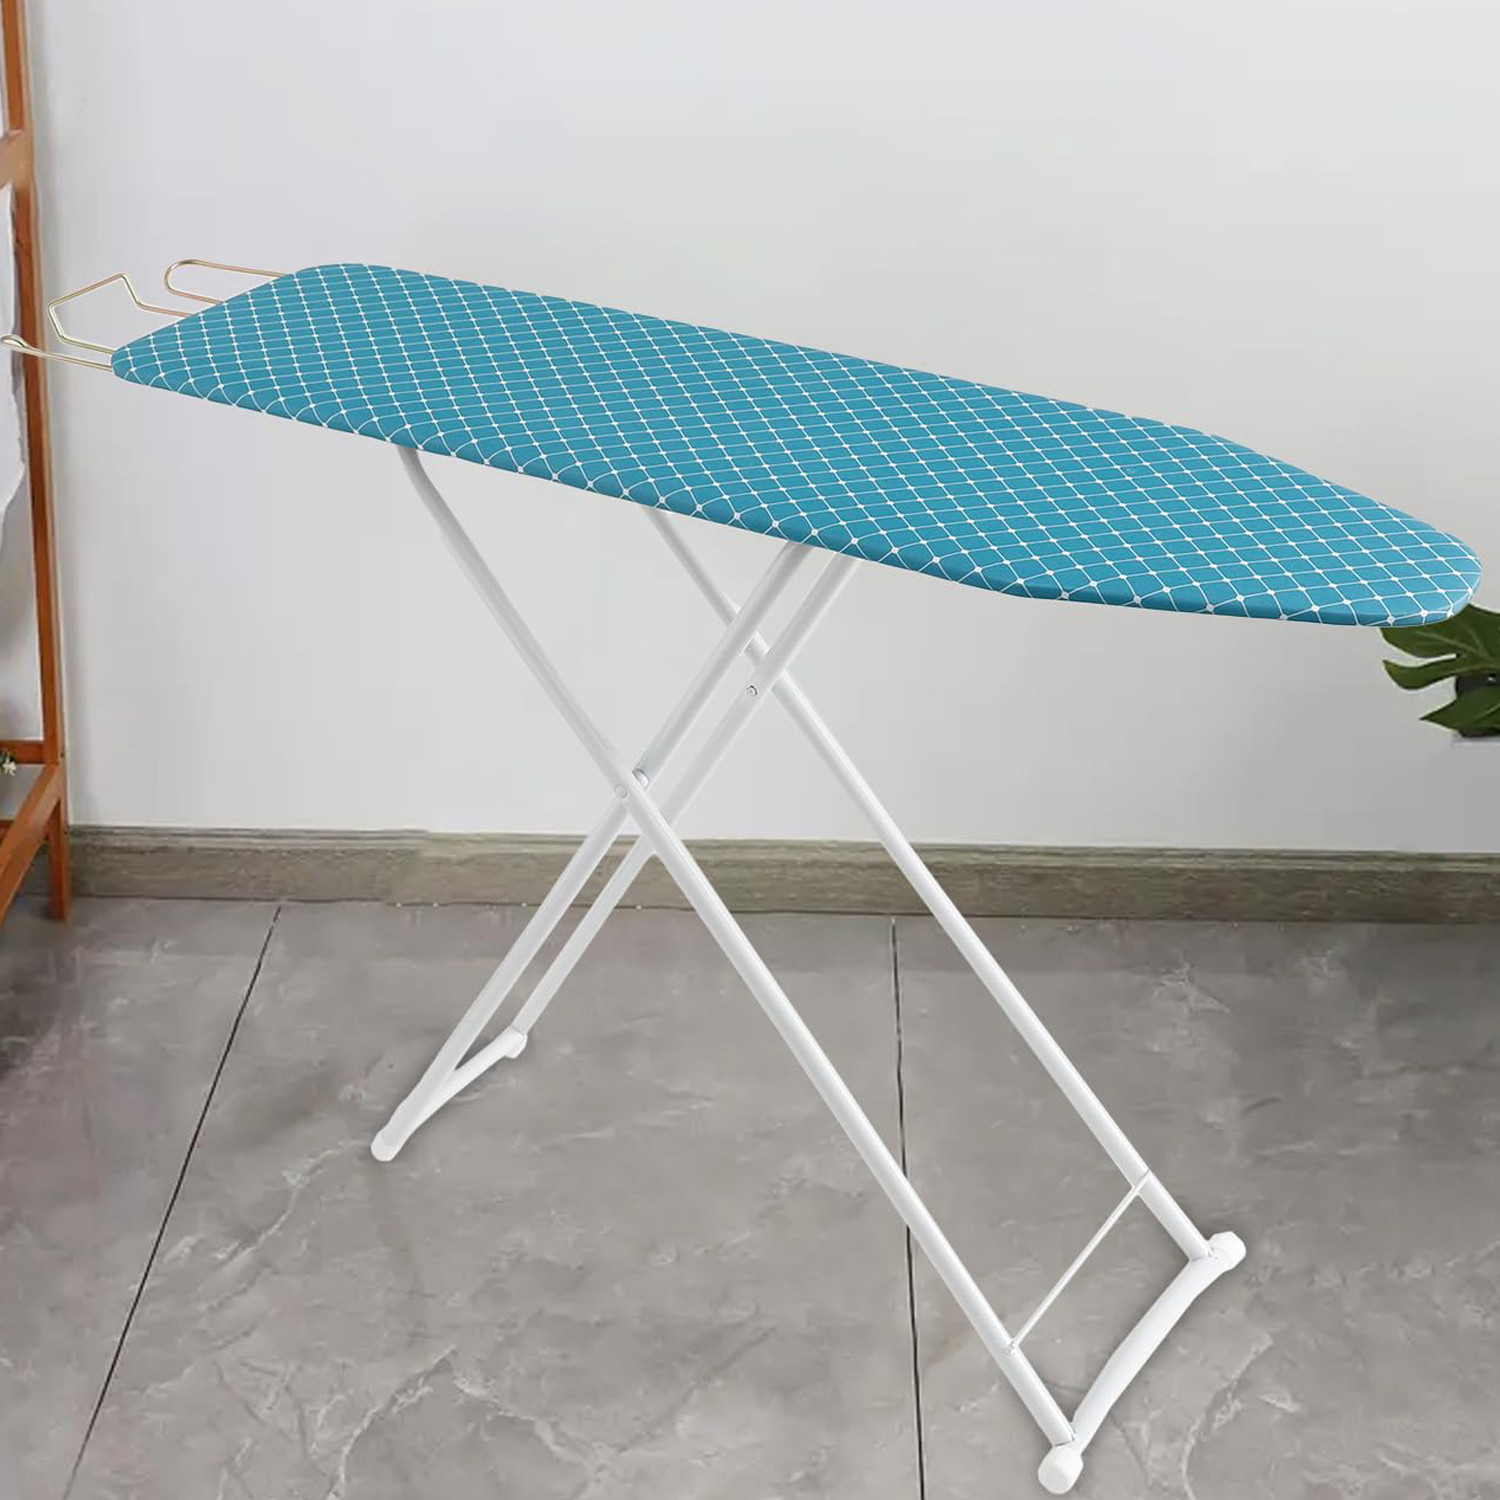 Kuber Industries 42 Inch Ironing Board For Clothes|Adjustable Height Ironing Stand|Press Table for Home (Blue)